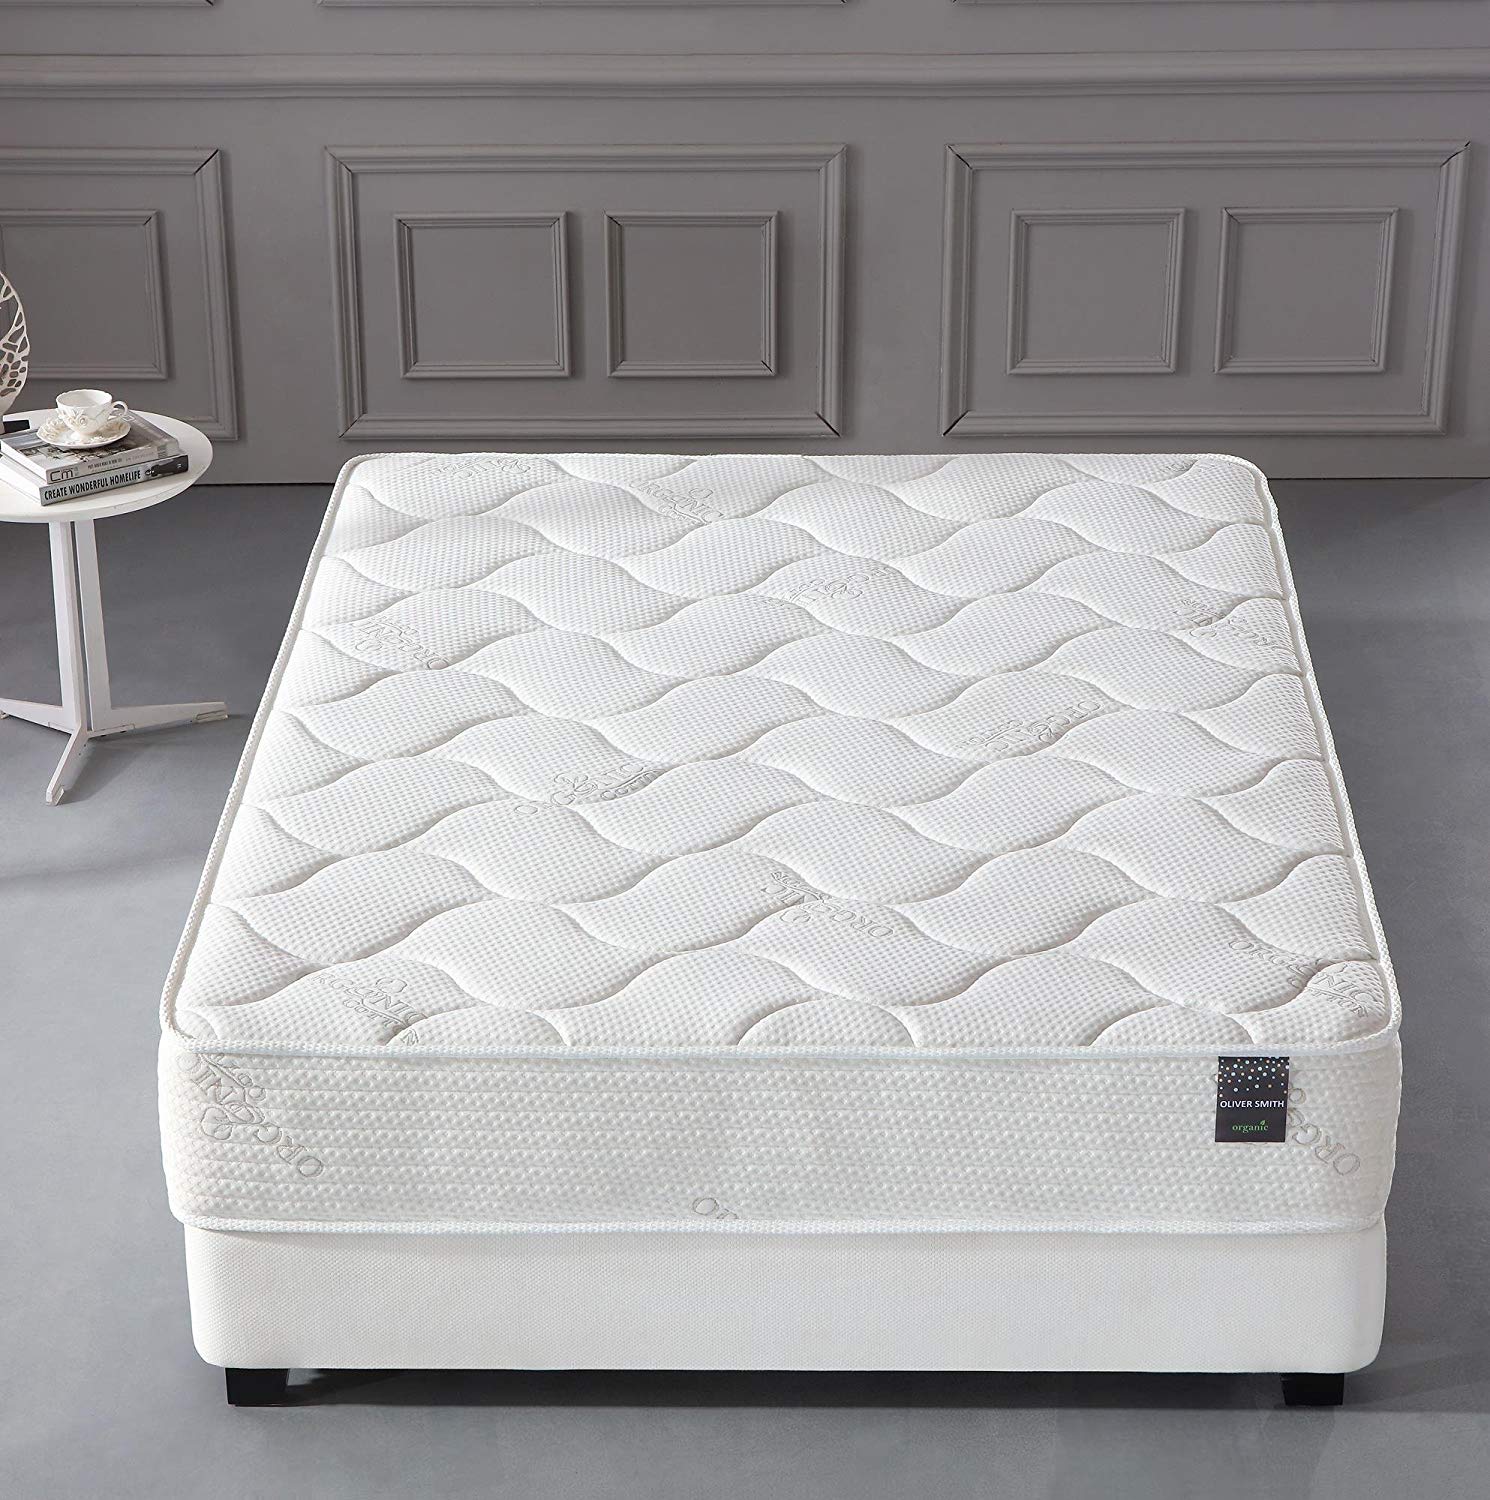 100% Natural Organic Cotton Mattress By Oliver Smith ...